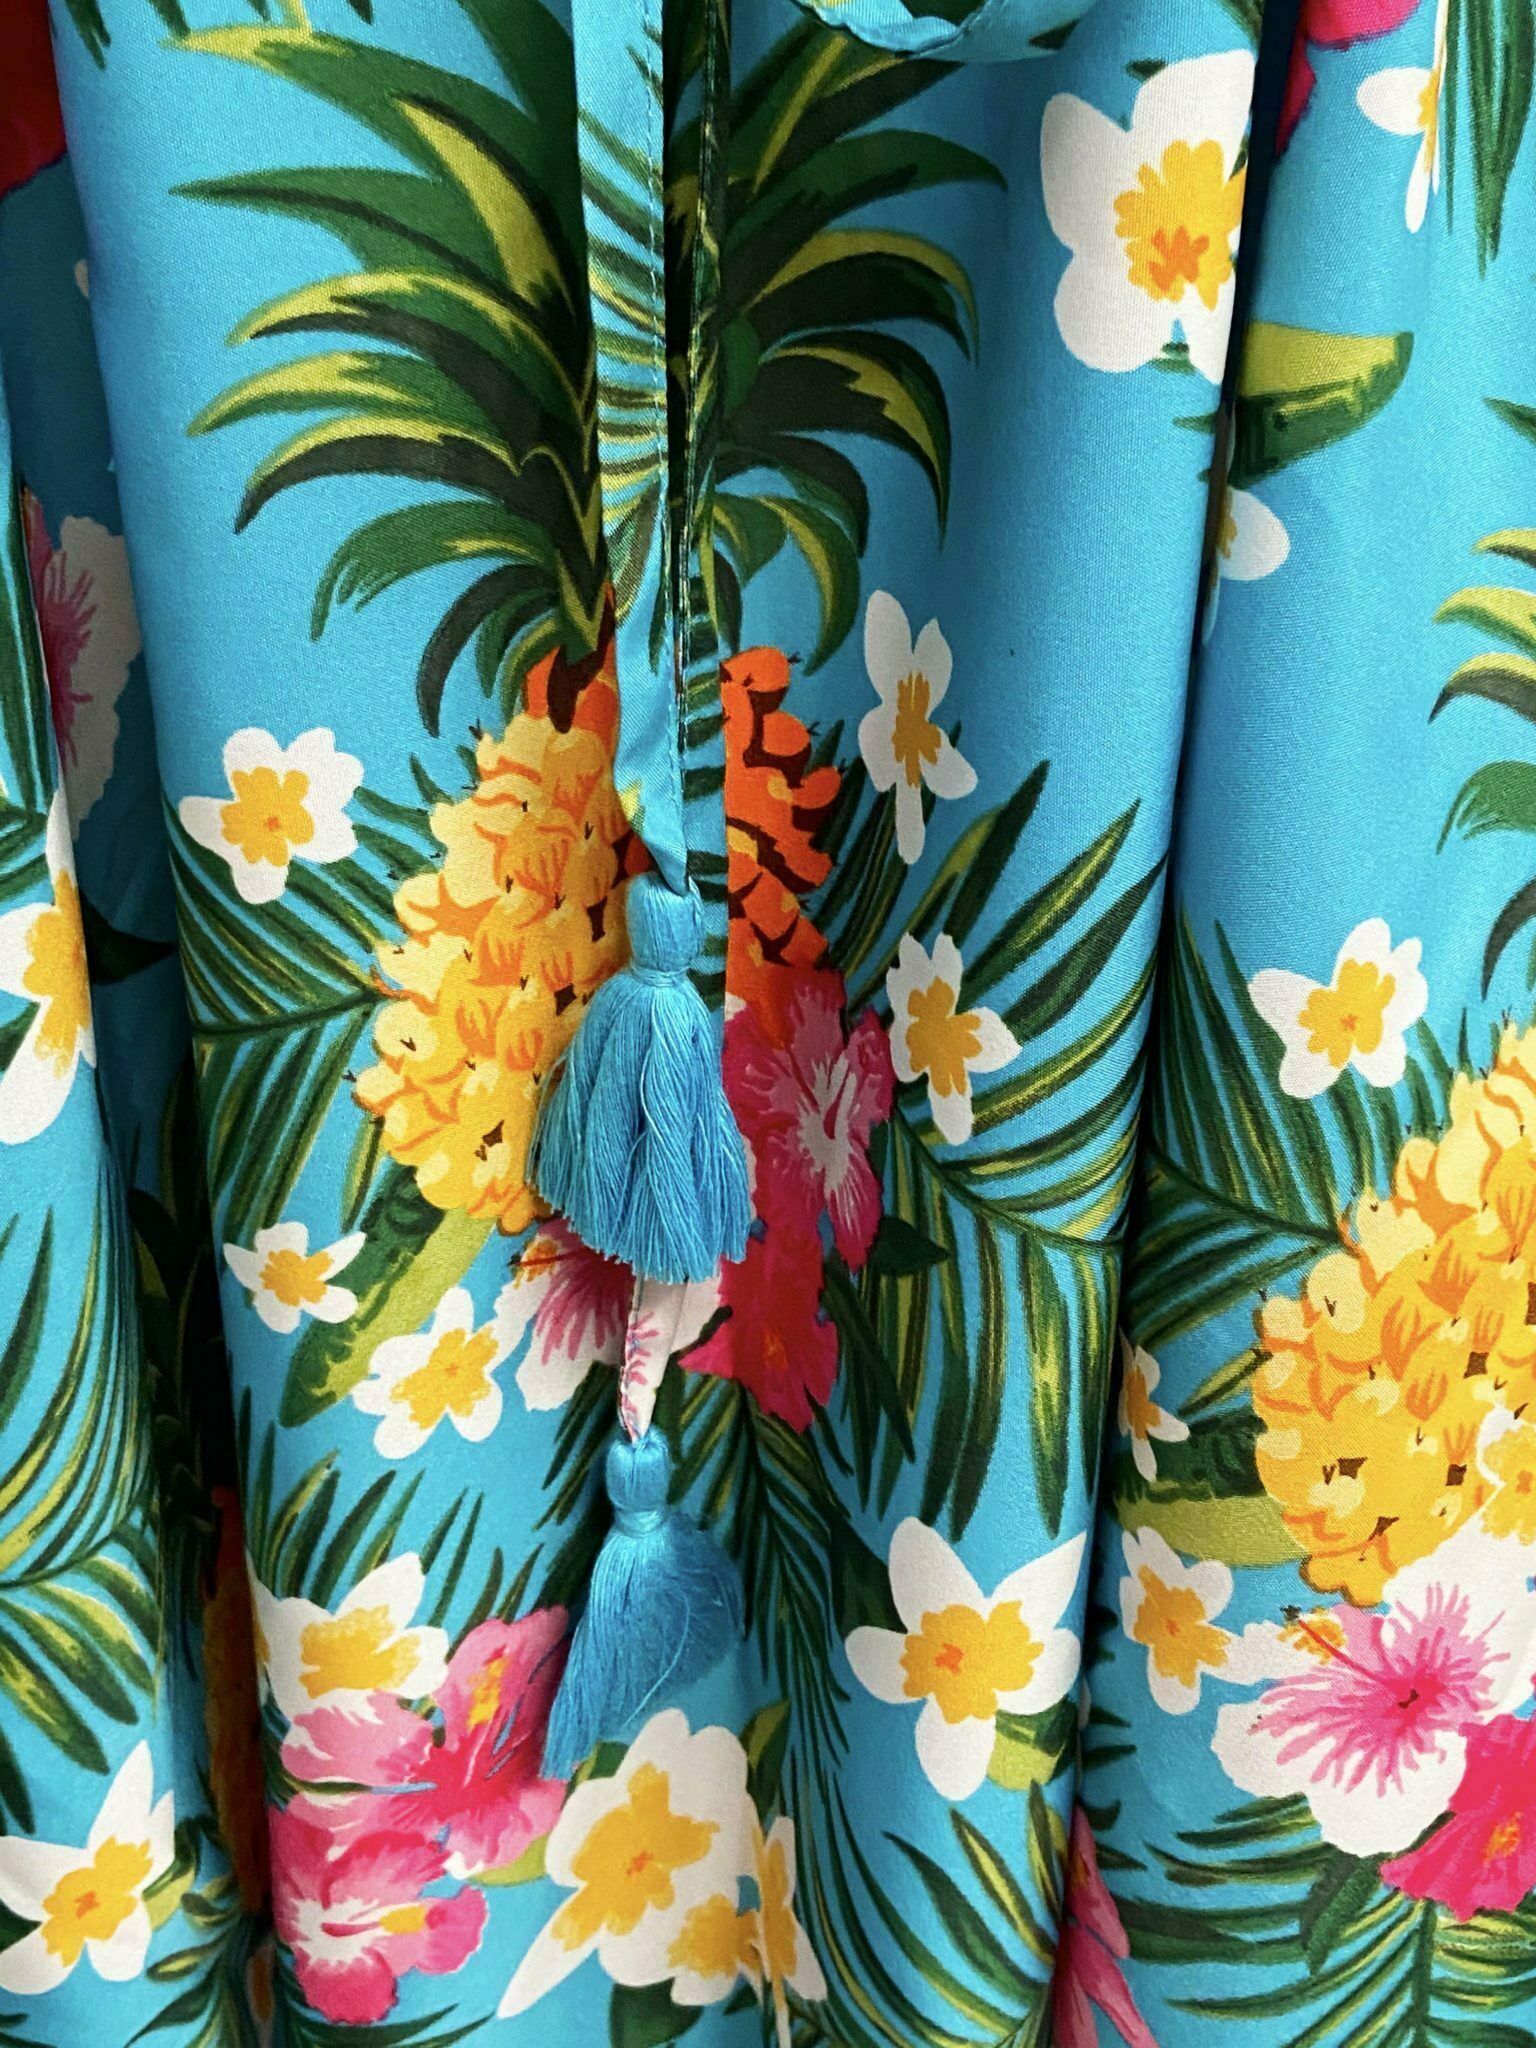 Repeating pattern tropical print with pineapples, frangipannis and palm fronds